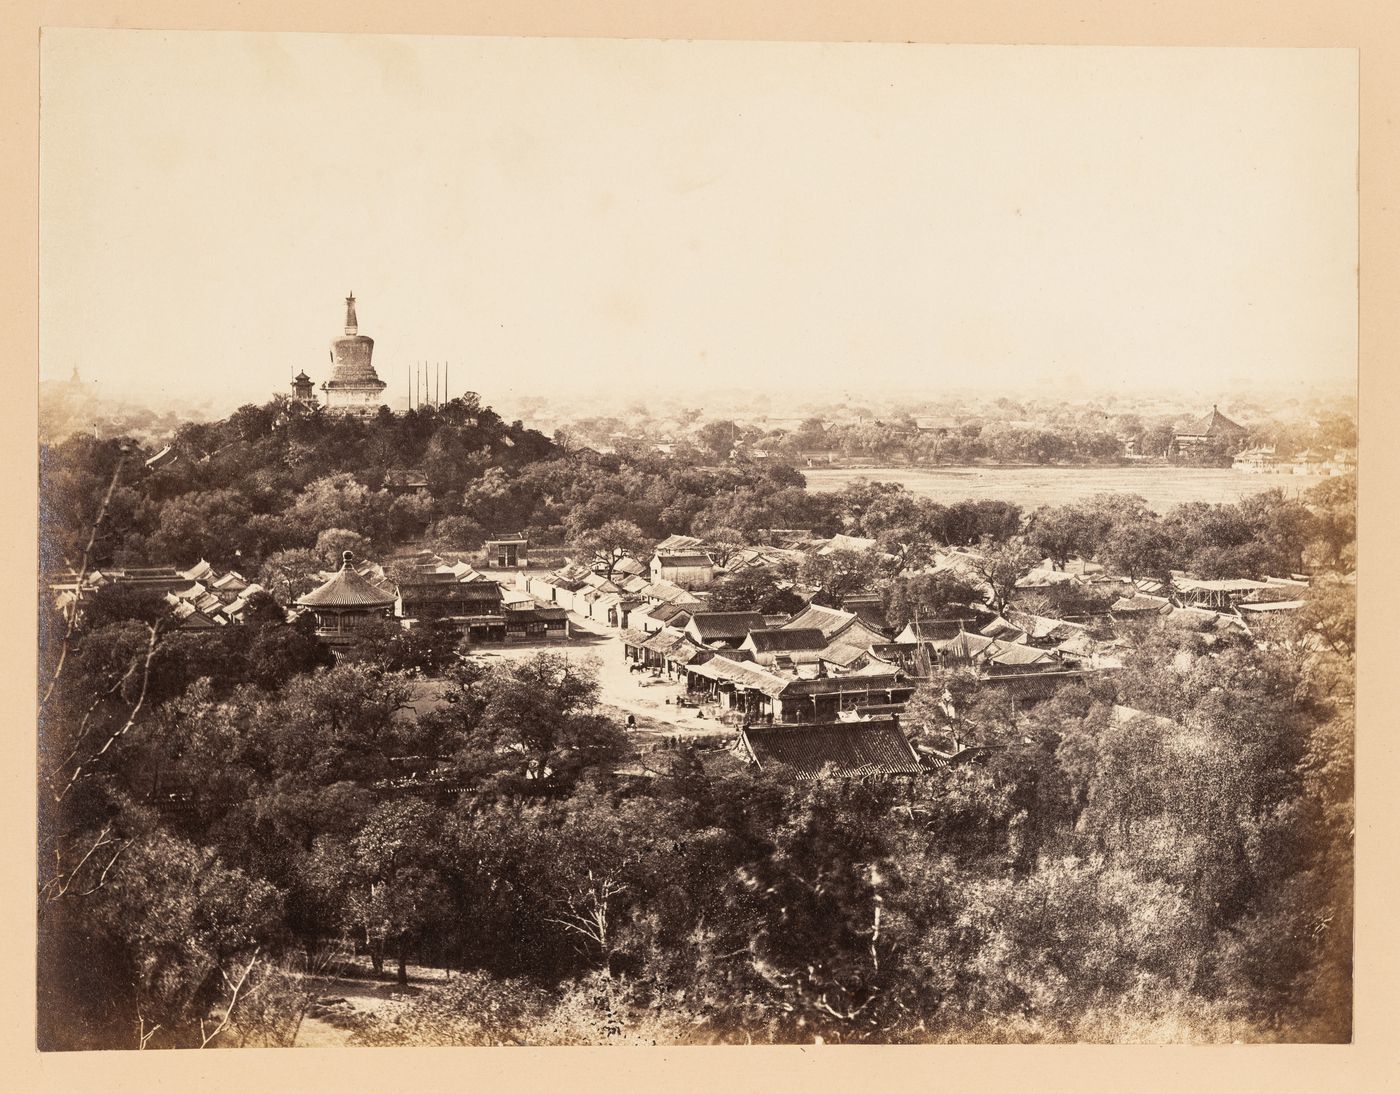 Panoramic view of a section of the Imperial City showing Jade Flowery Island [Qionghua Dao], the White Pagoda [Bai Ta], part of North Lake [Beihai] and other structures in the Western Garden (now Beihai Park), Peking (now Beijing), China